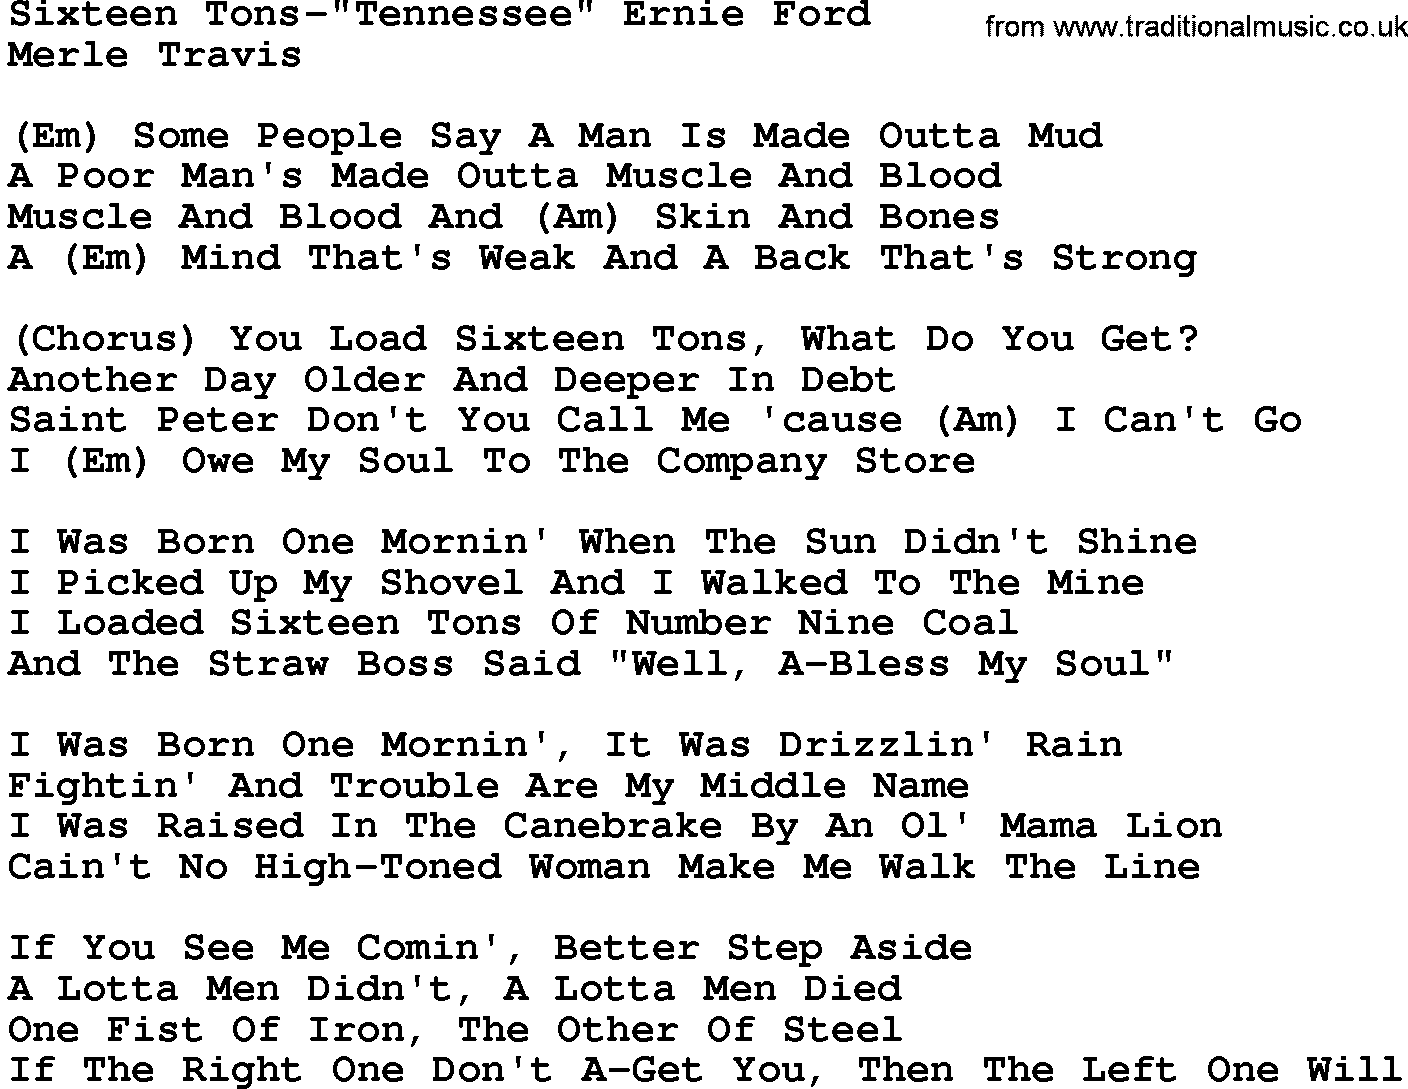 Country music song: Sixteen Tons-Tennessee Ernie Ford lyrics and chords